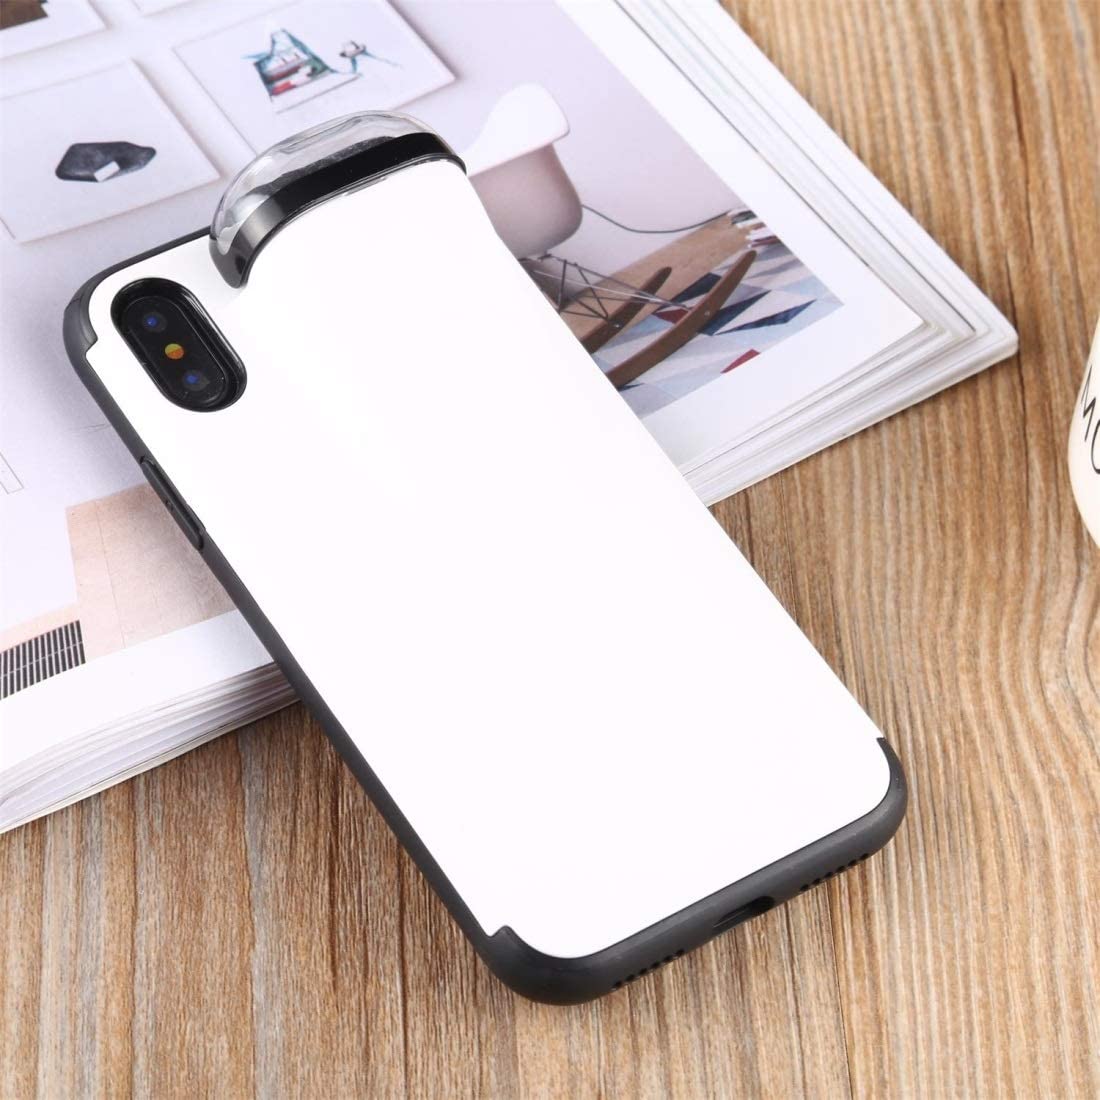 iPhone Aipod Case Best Airpods Holder iPhone Cover - Podshield™ White Podshield™ Zaavio®